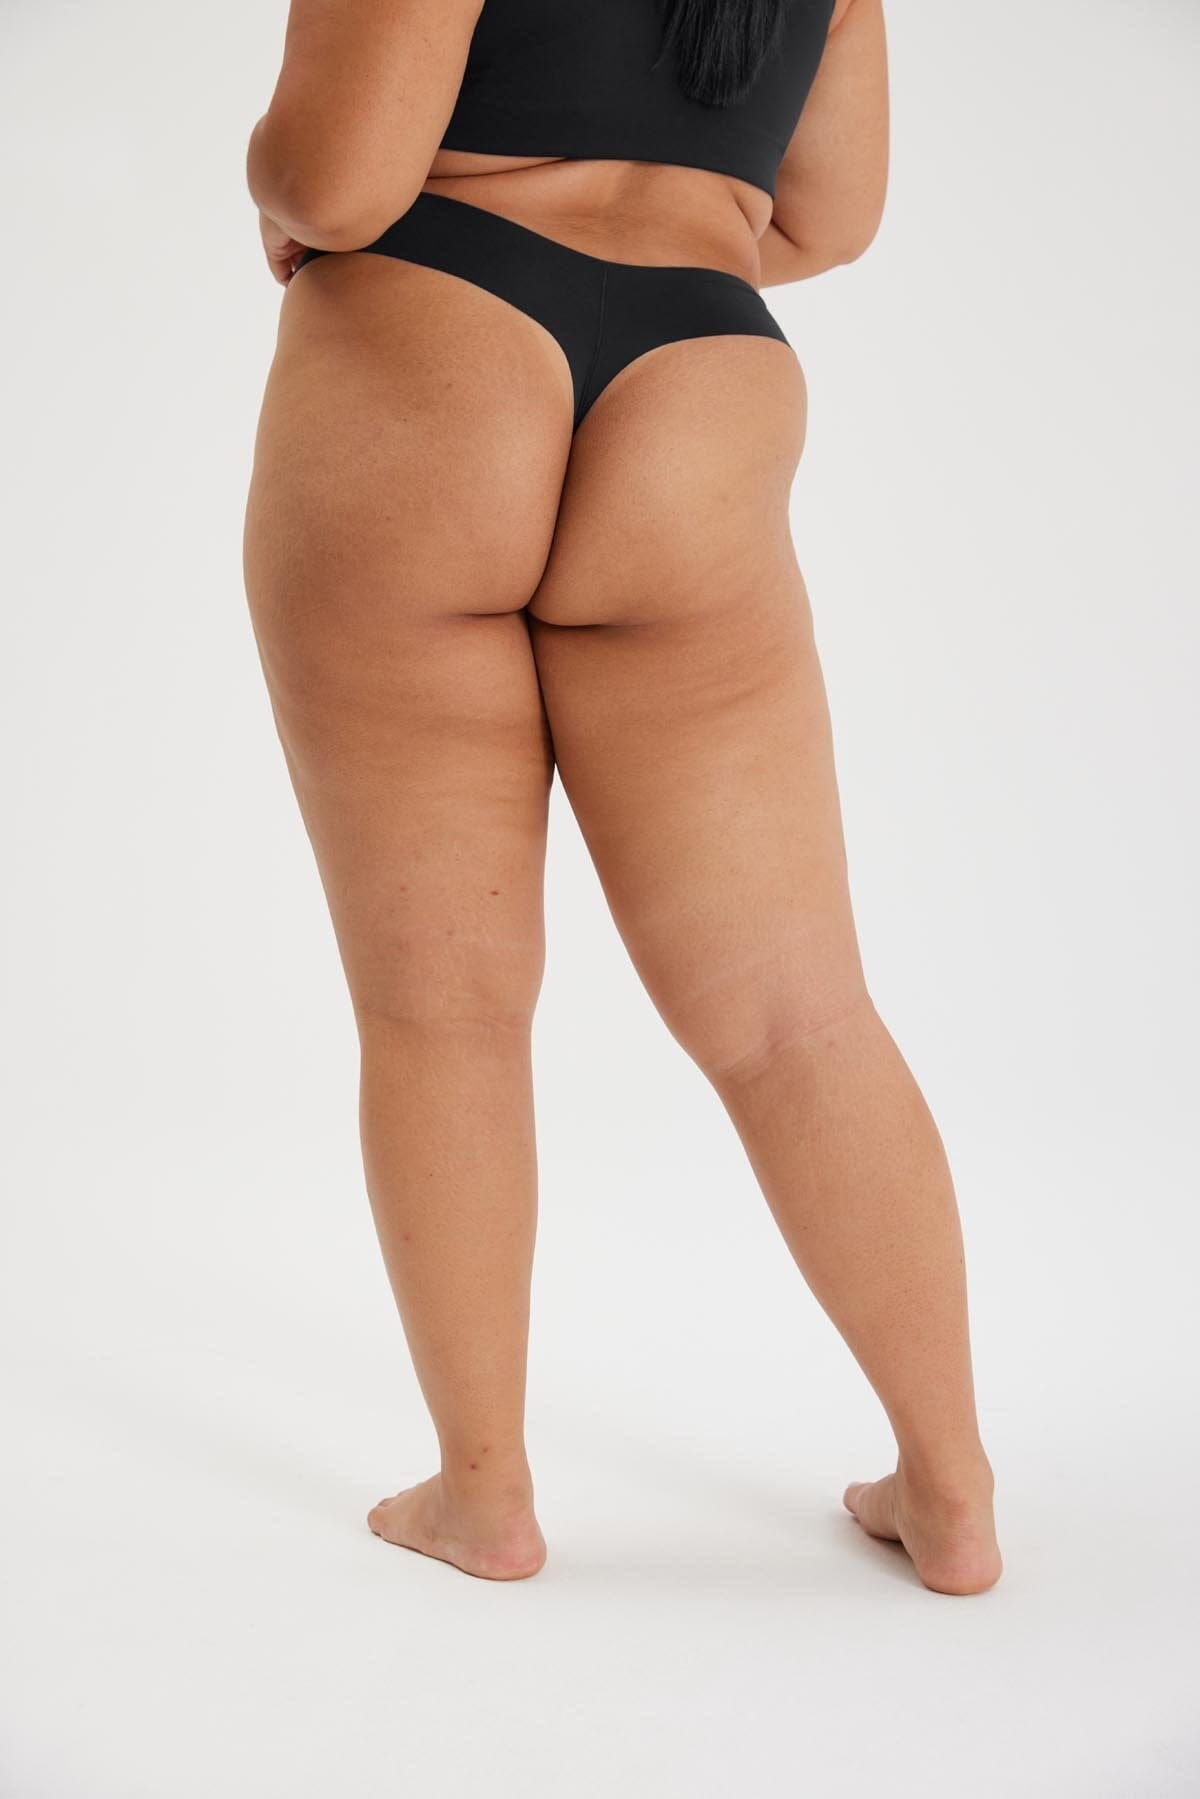 Girlfriend Collective - Sport Thong - Recycled Polyester - Weekendbee - sustainable sportswear